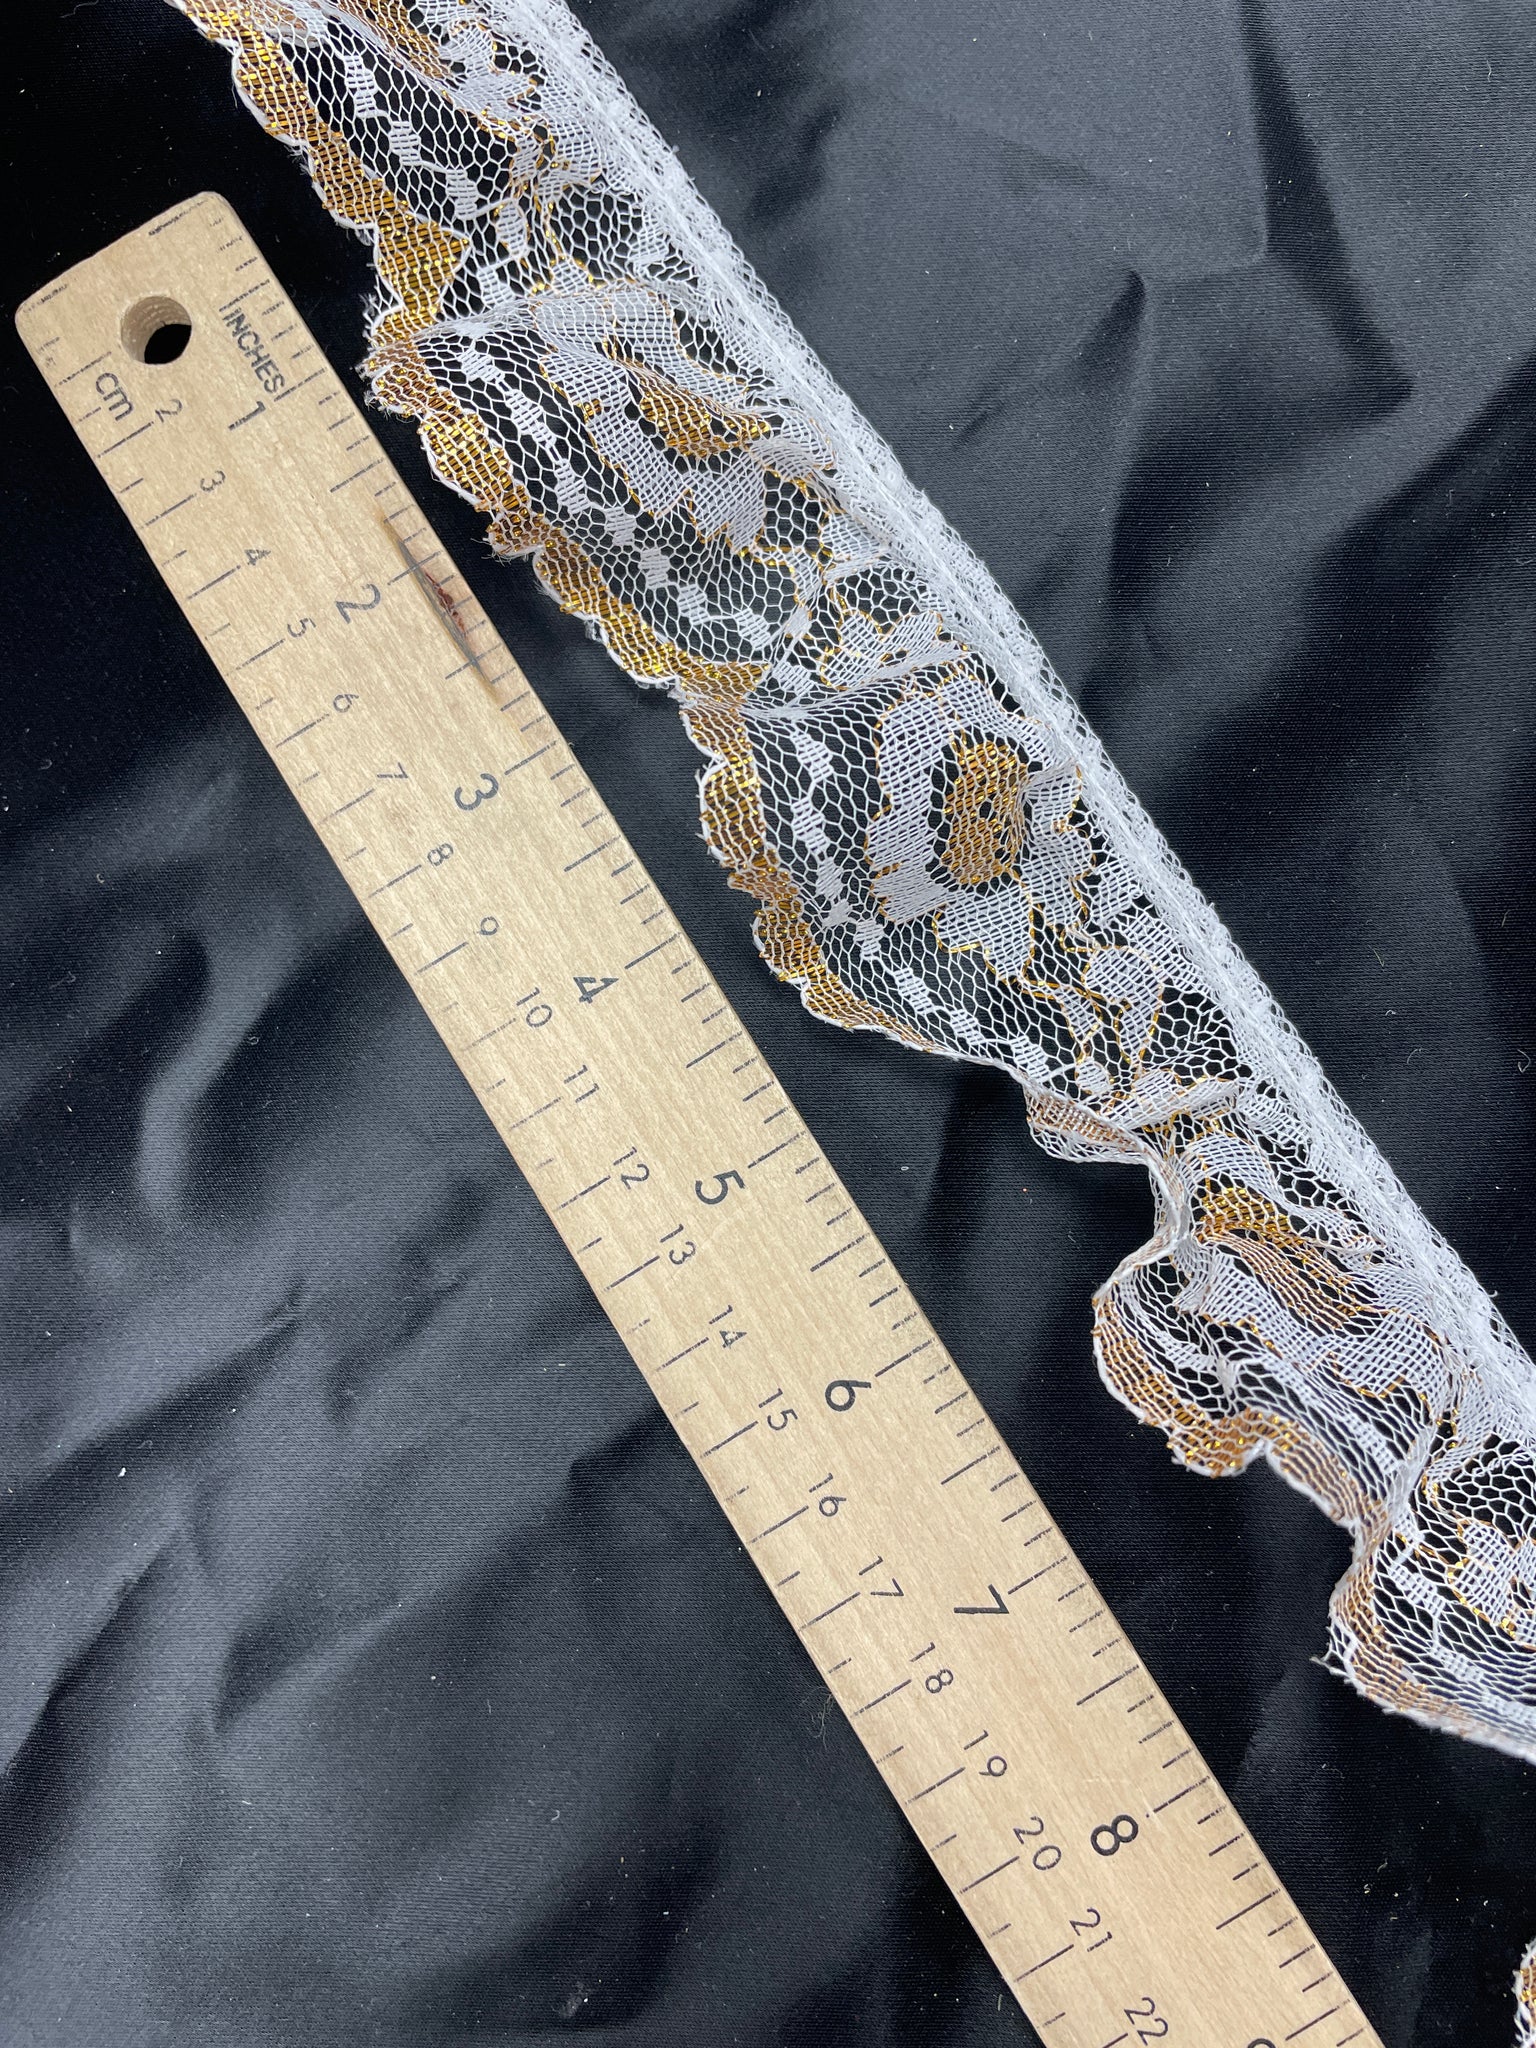 1 7/8 YD Polyester Ruffled Wide Lace Trim - White and Metallic Gold Accents